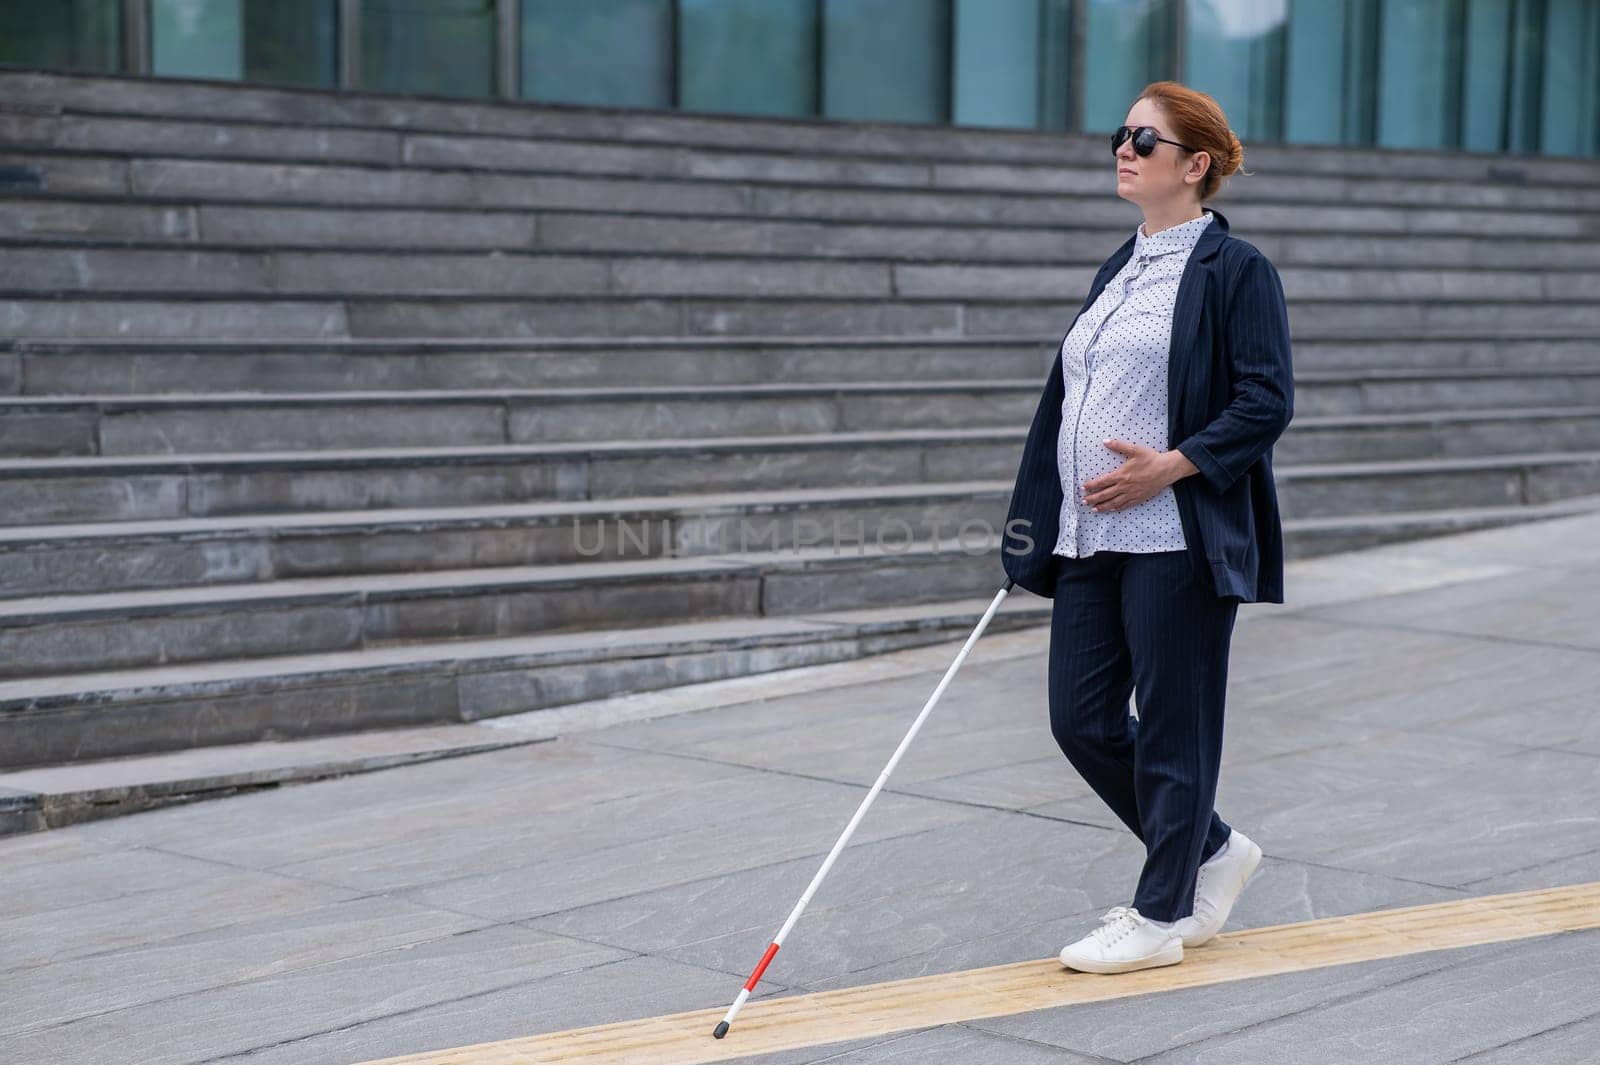 Blind pregnant businesswoman walking along tactile tiles with a cane. by mrwed54